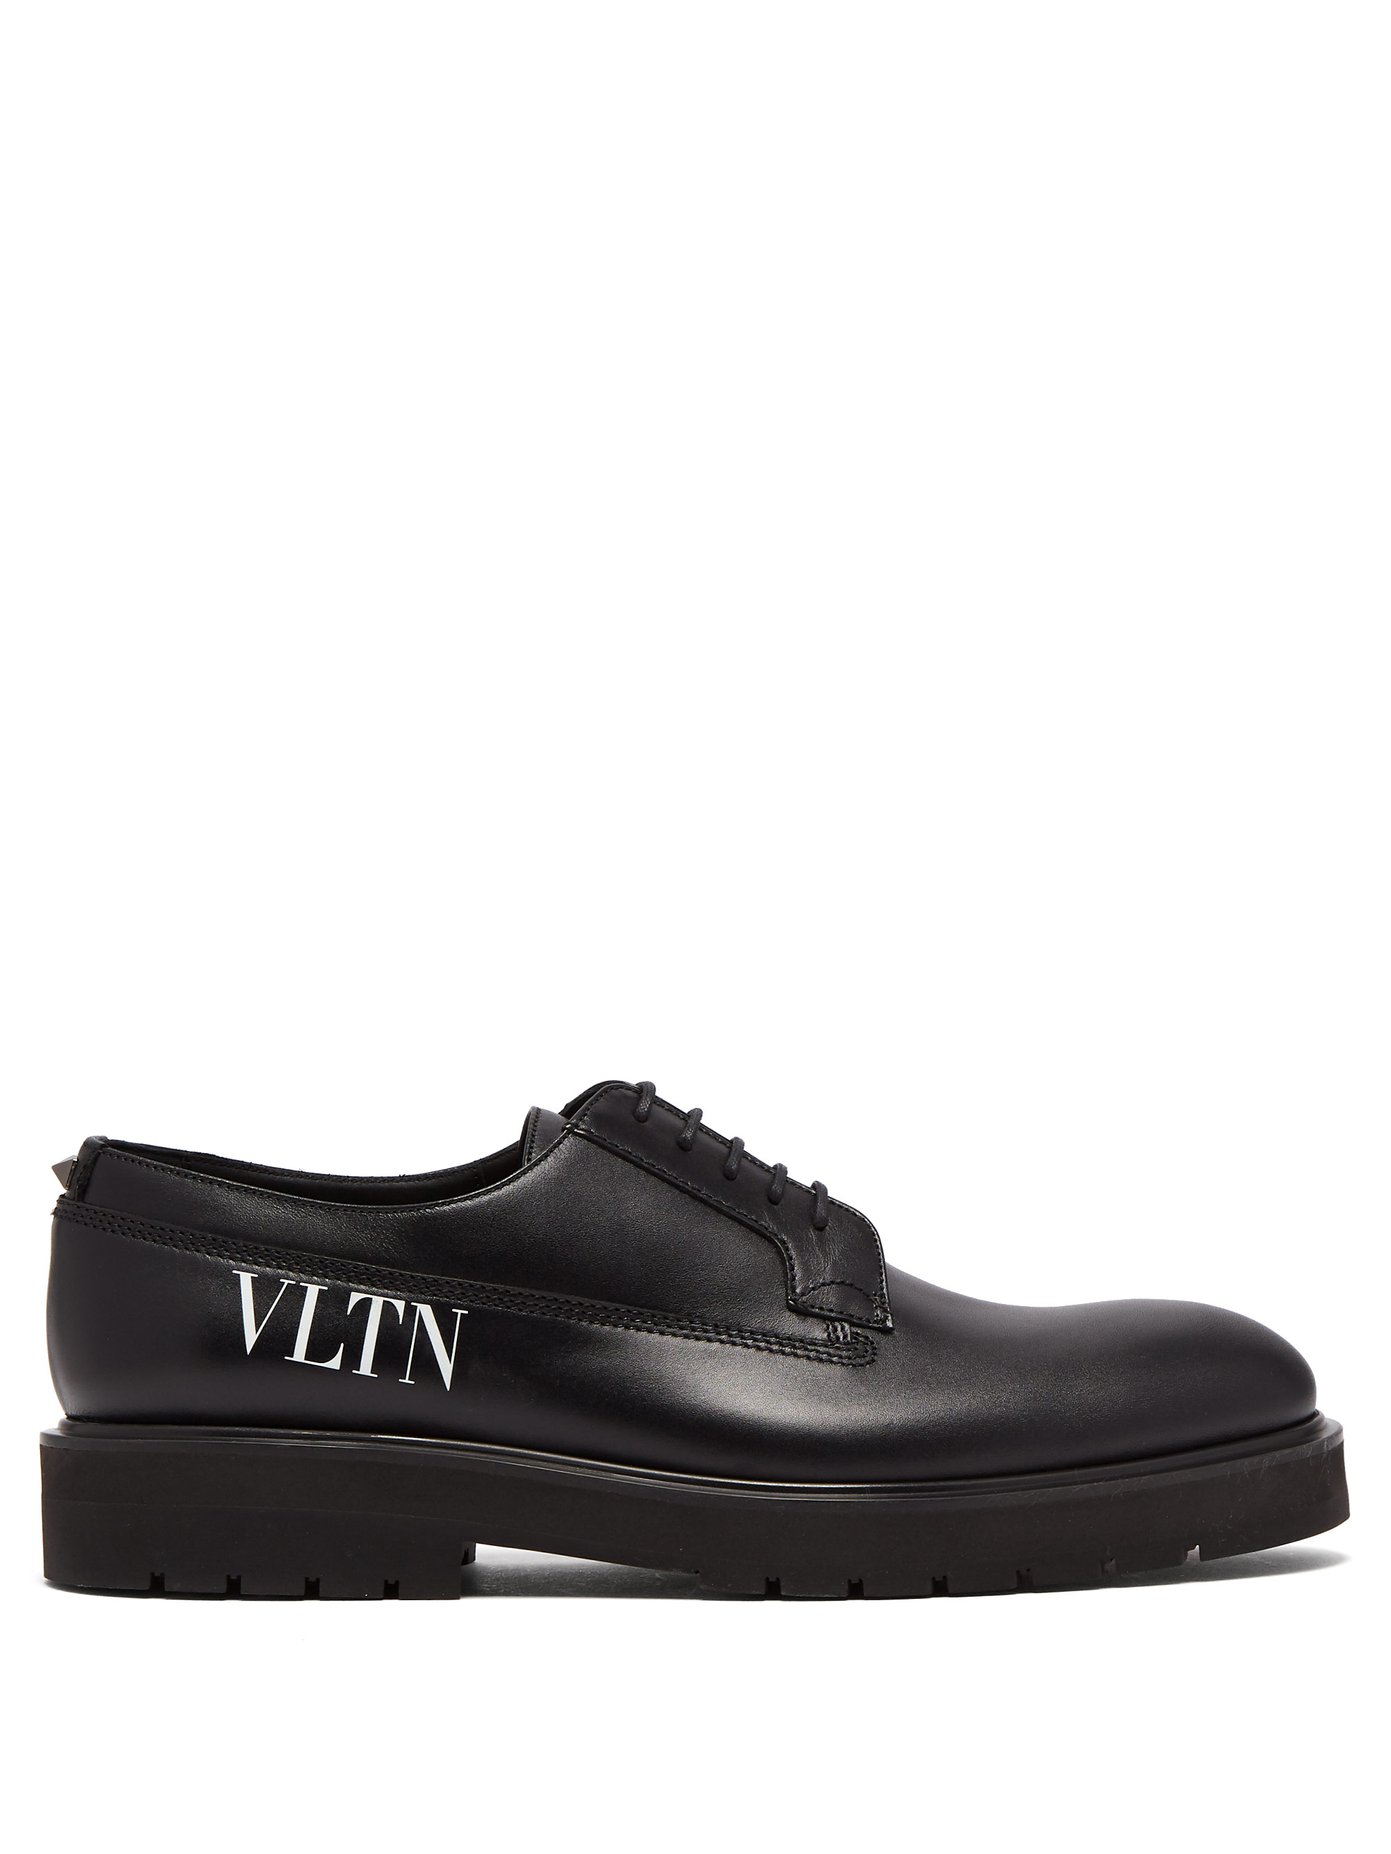 be my vltn shoes